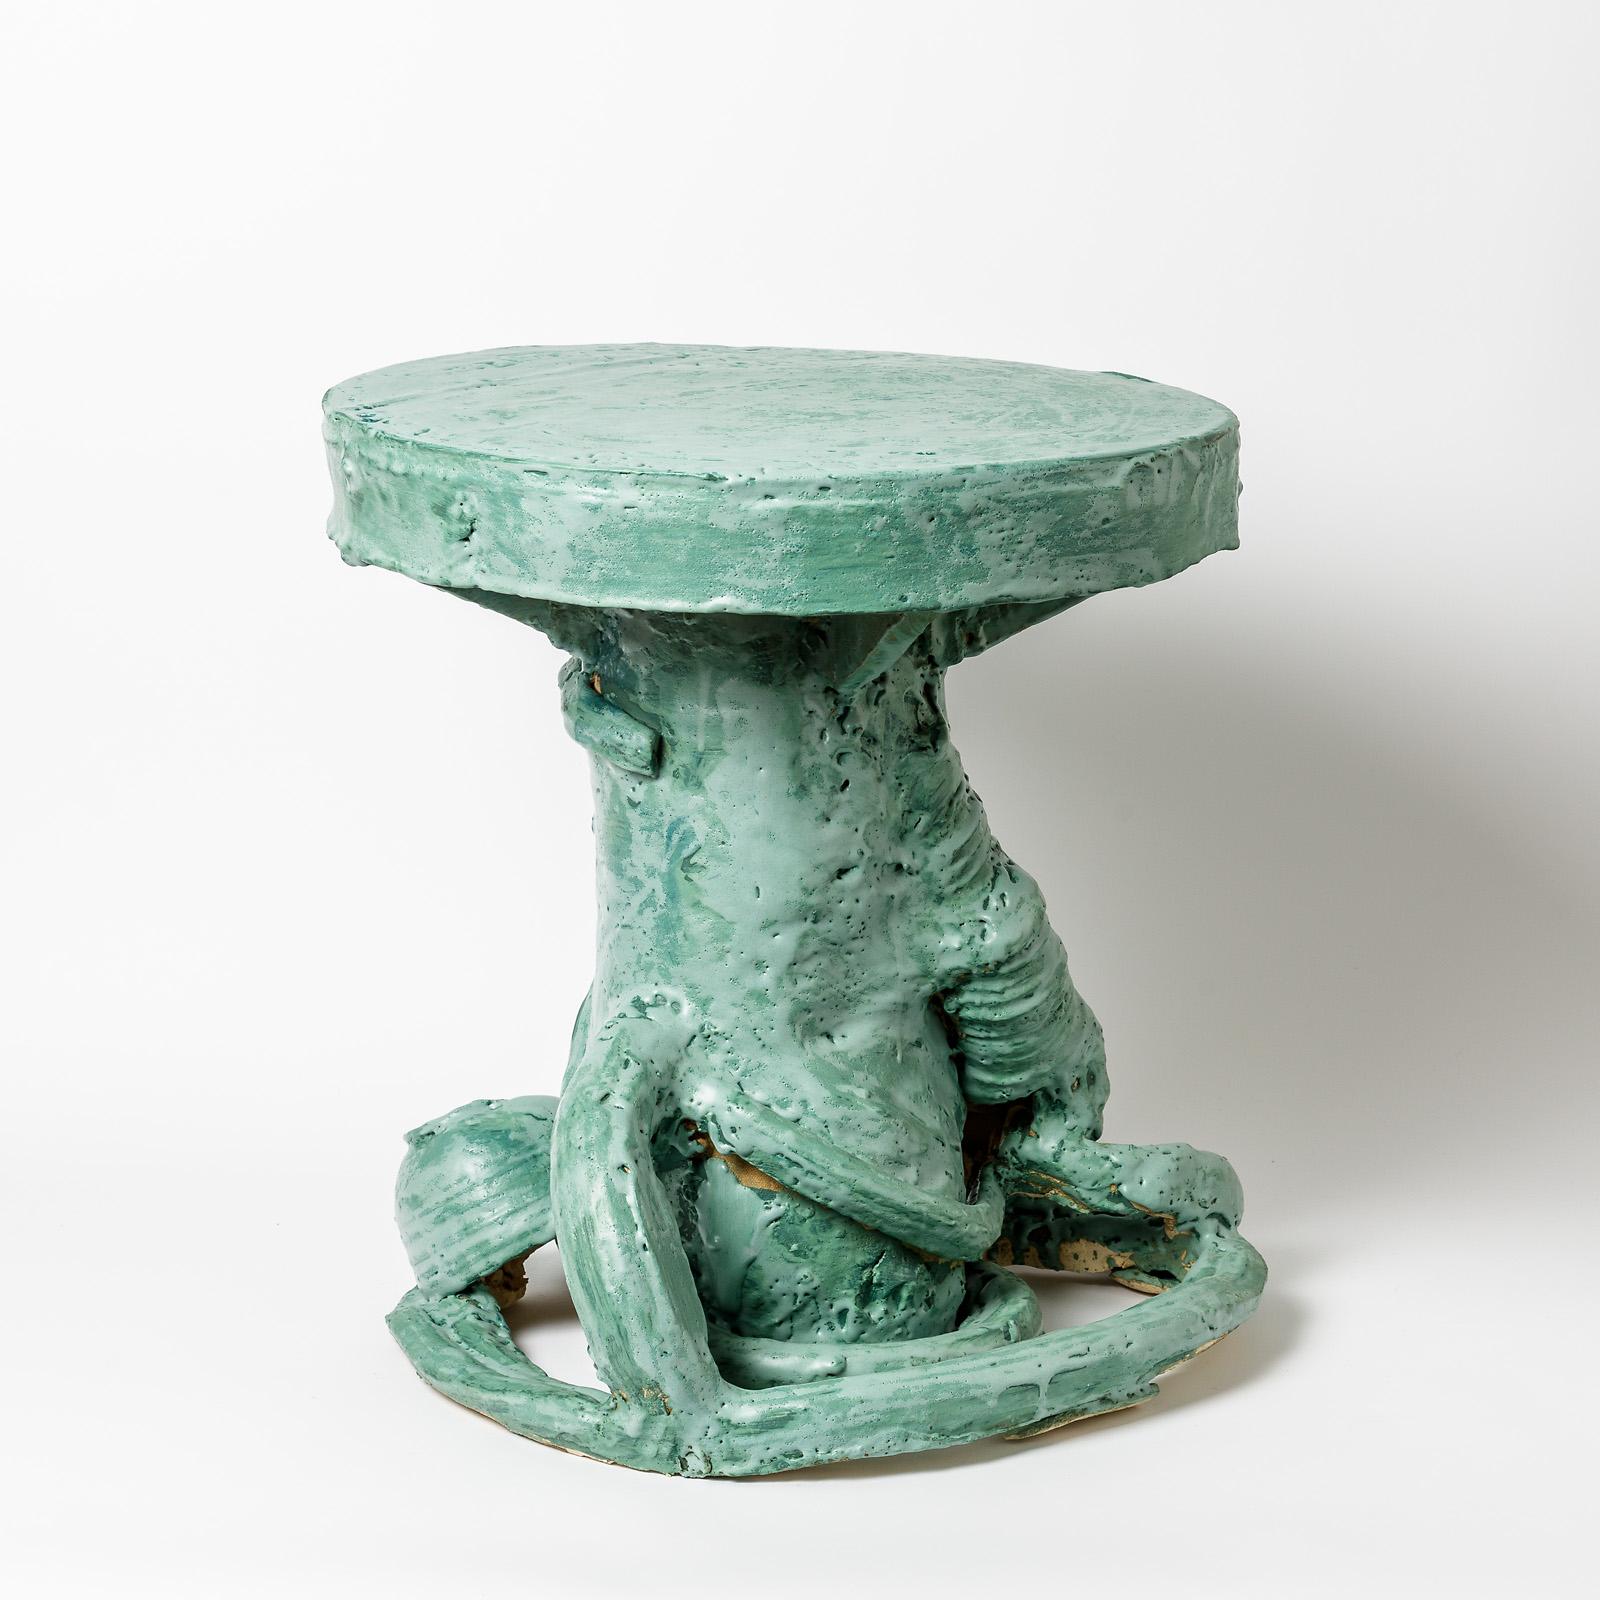 French Ceramic Table with Green Glaze Decoration by Patrick Crulis, 2021